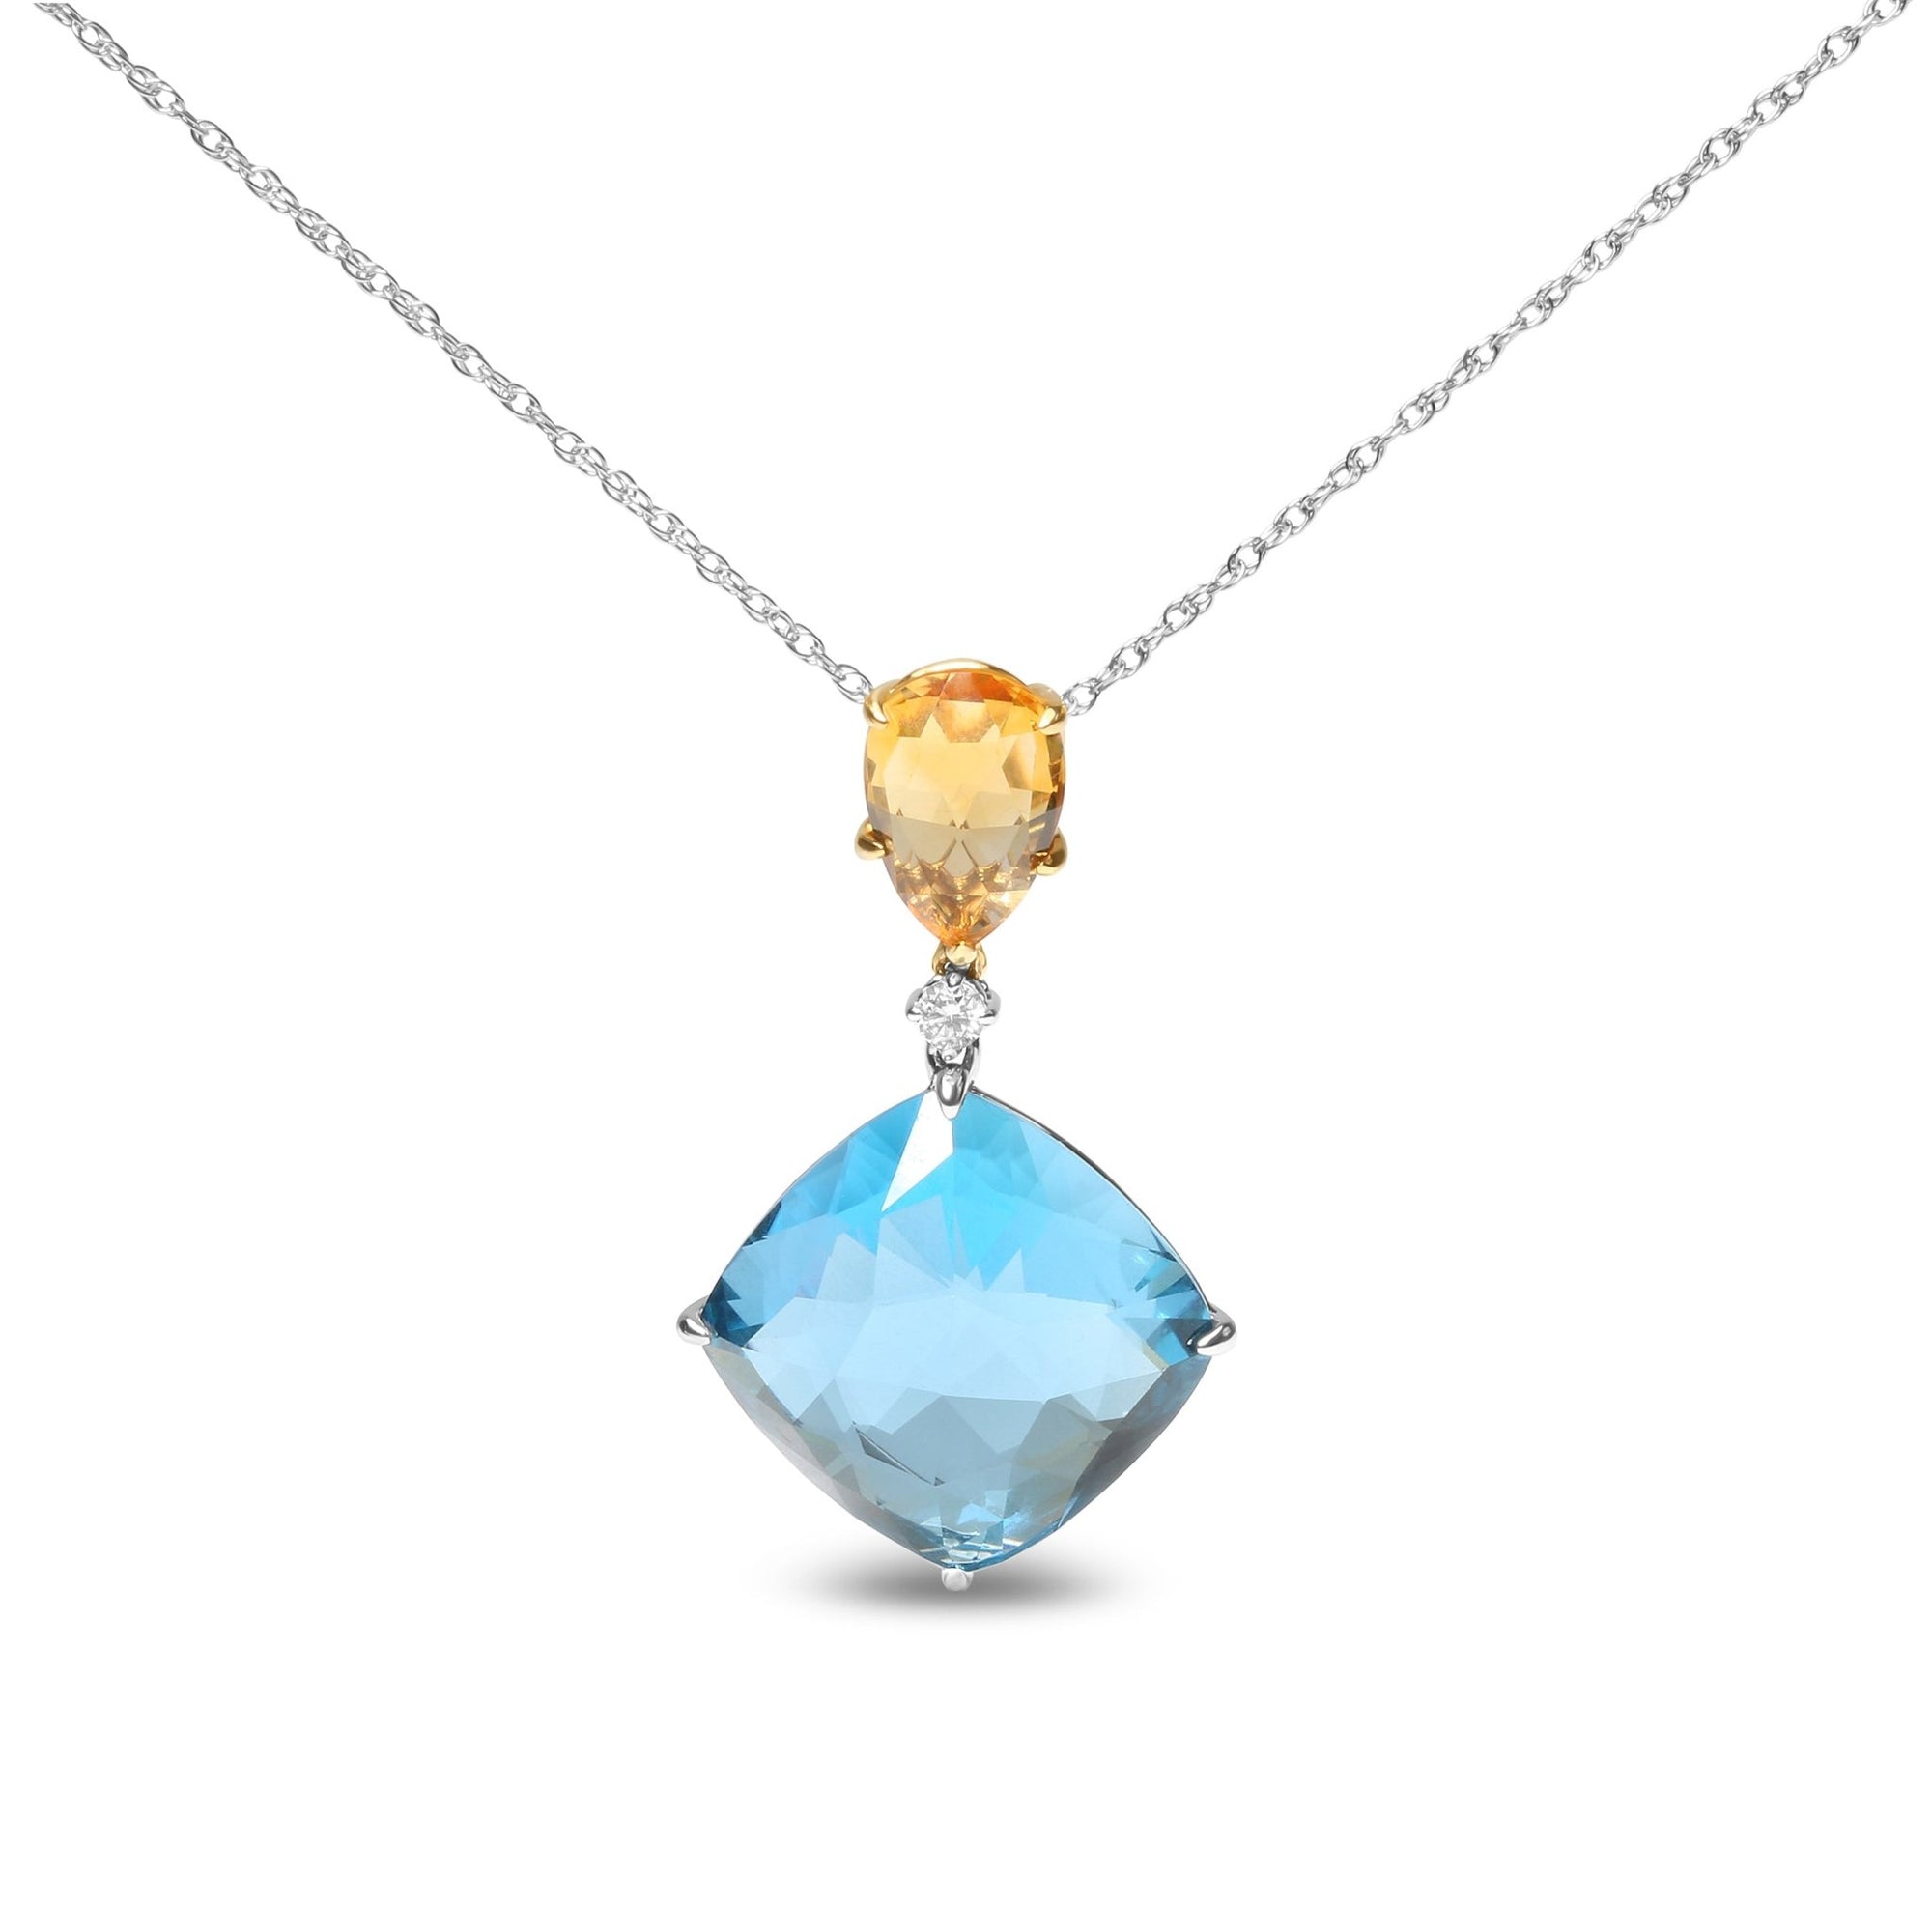 18K White and Yellow Gold Diamond Accent and Yellow Citrine and Sky Blue Topaz Gemstone Dangle Drop 18" Pendant Necklace (G-H Color, SI1-SI2 Clarity) - LinkagejewelrydesignLinkagejewelrydesign